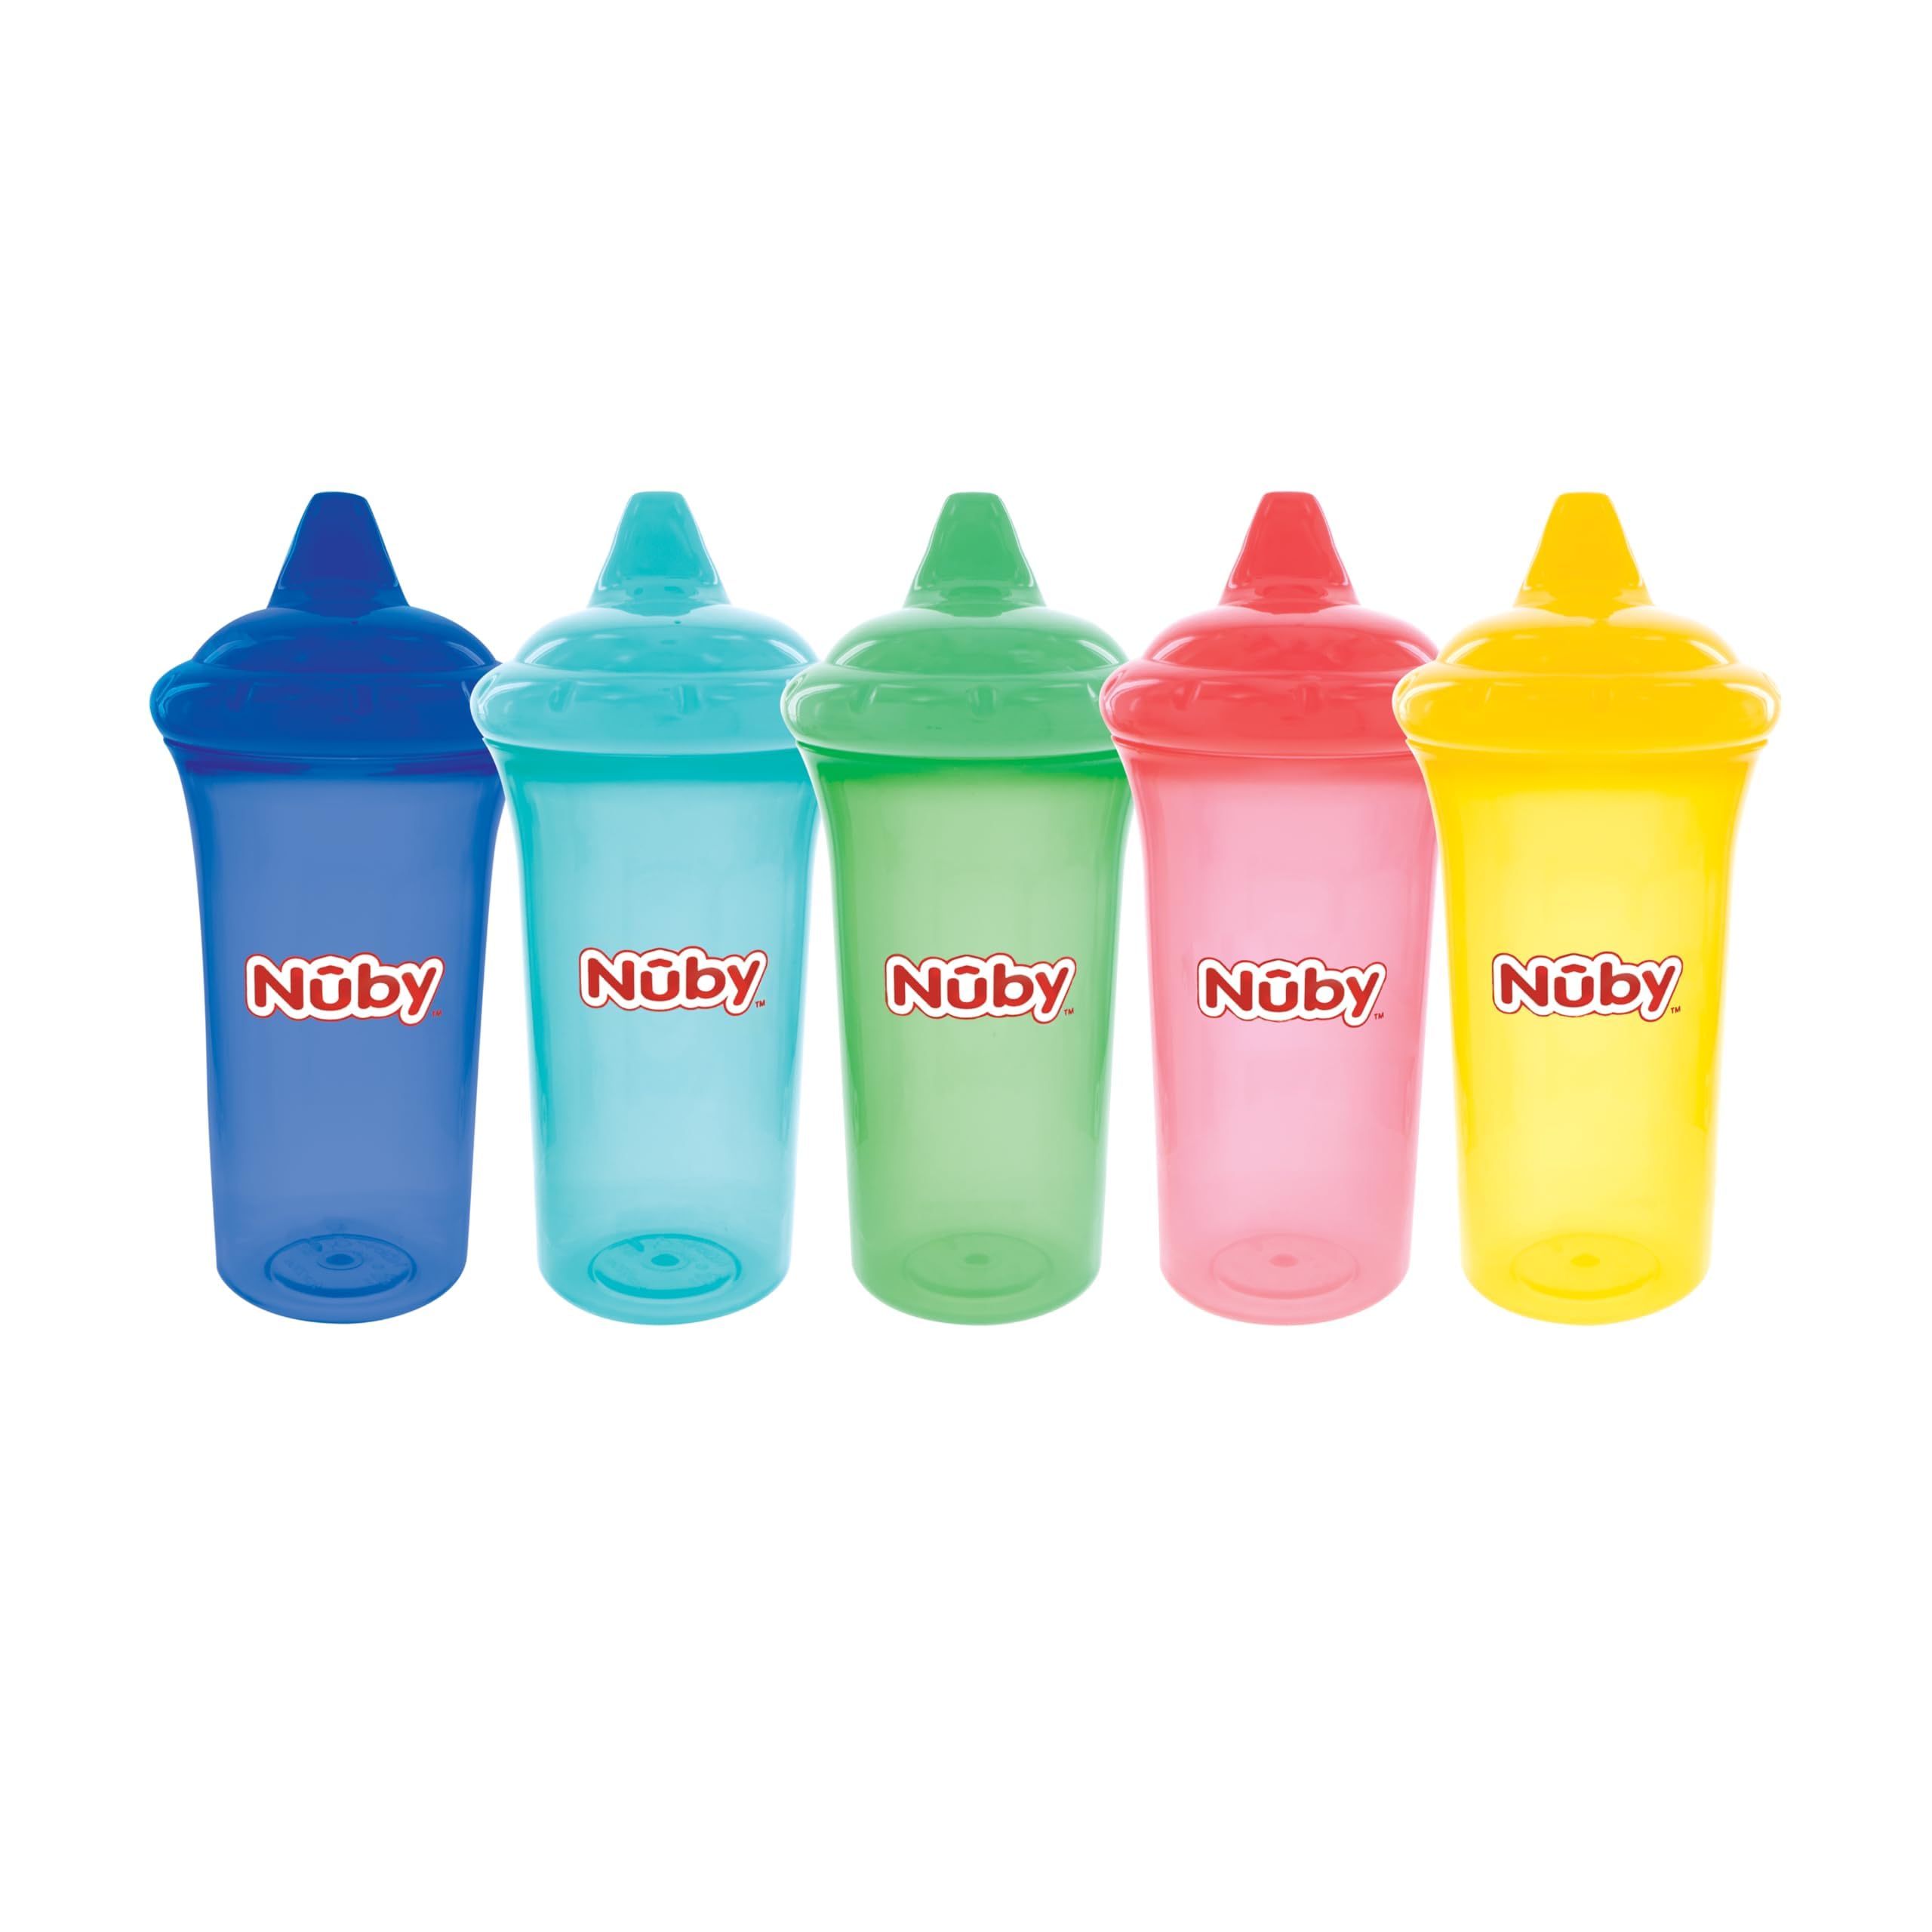 Nuby No-Spill Cup with Dual-Flo Valve, Sippy Cup for Baby and Toddler, 9 Ounce, Color May Vary (Package Includes Any 1 Random Color Sippy Cup Only)